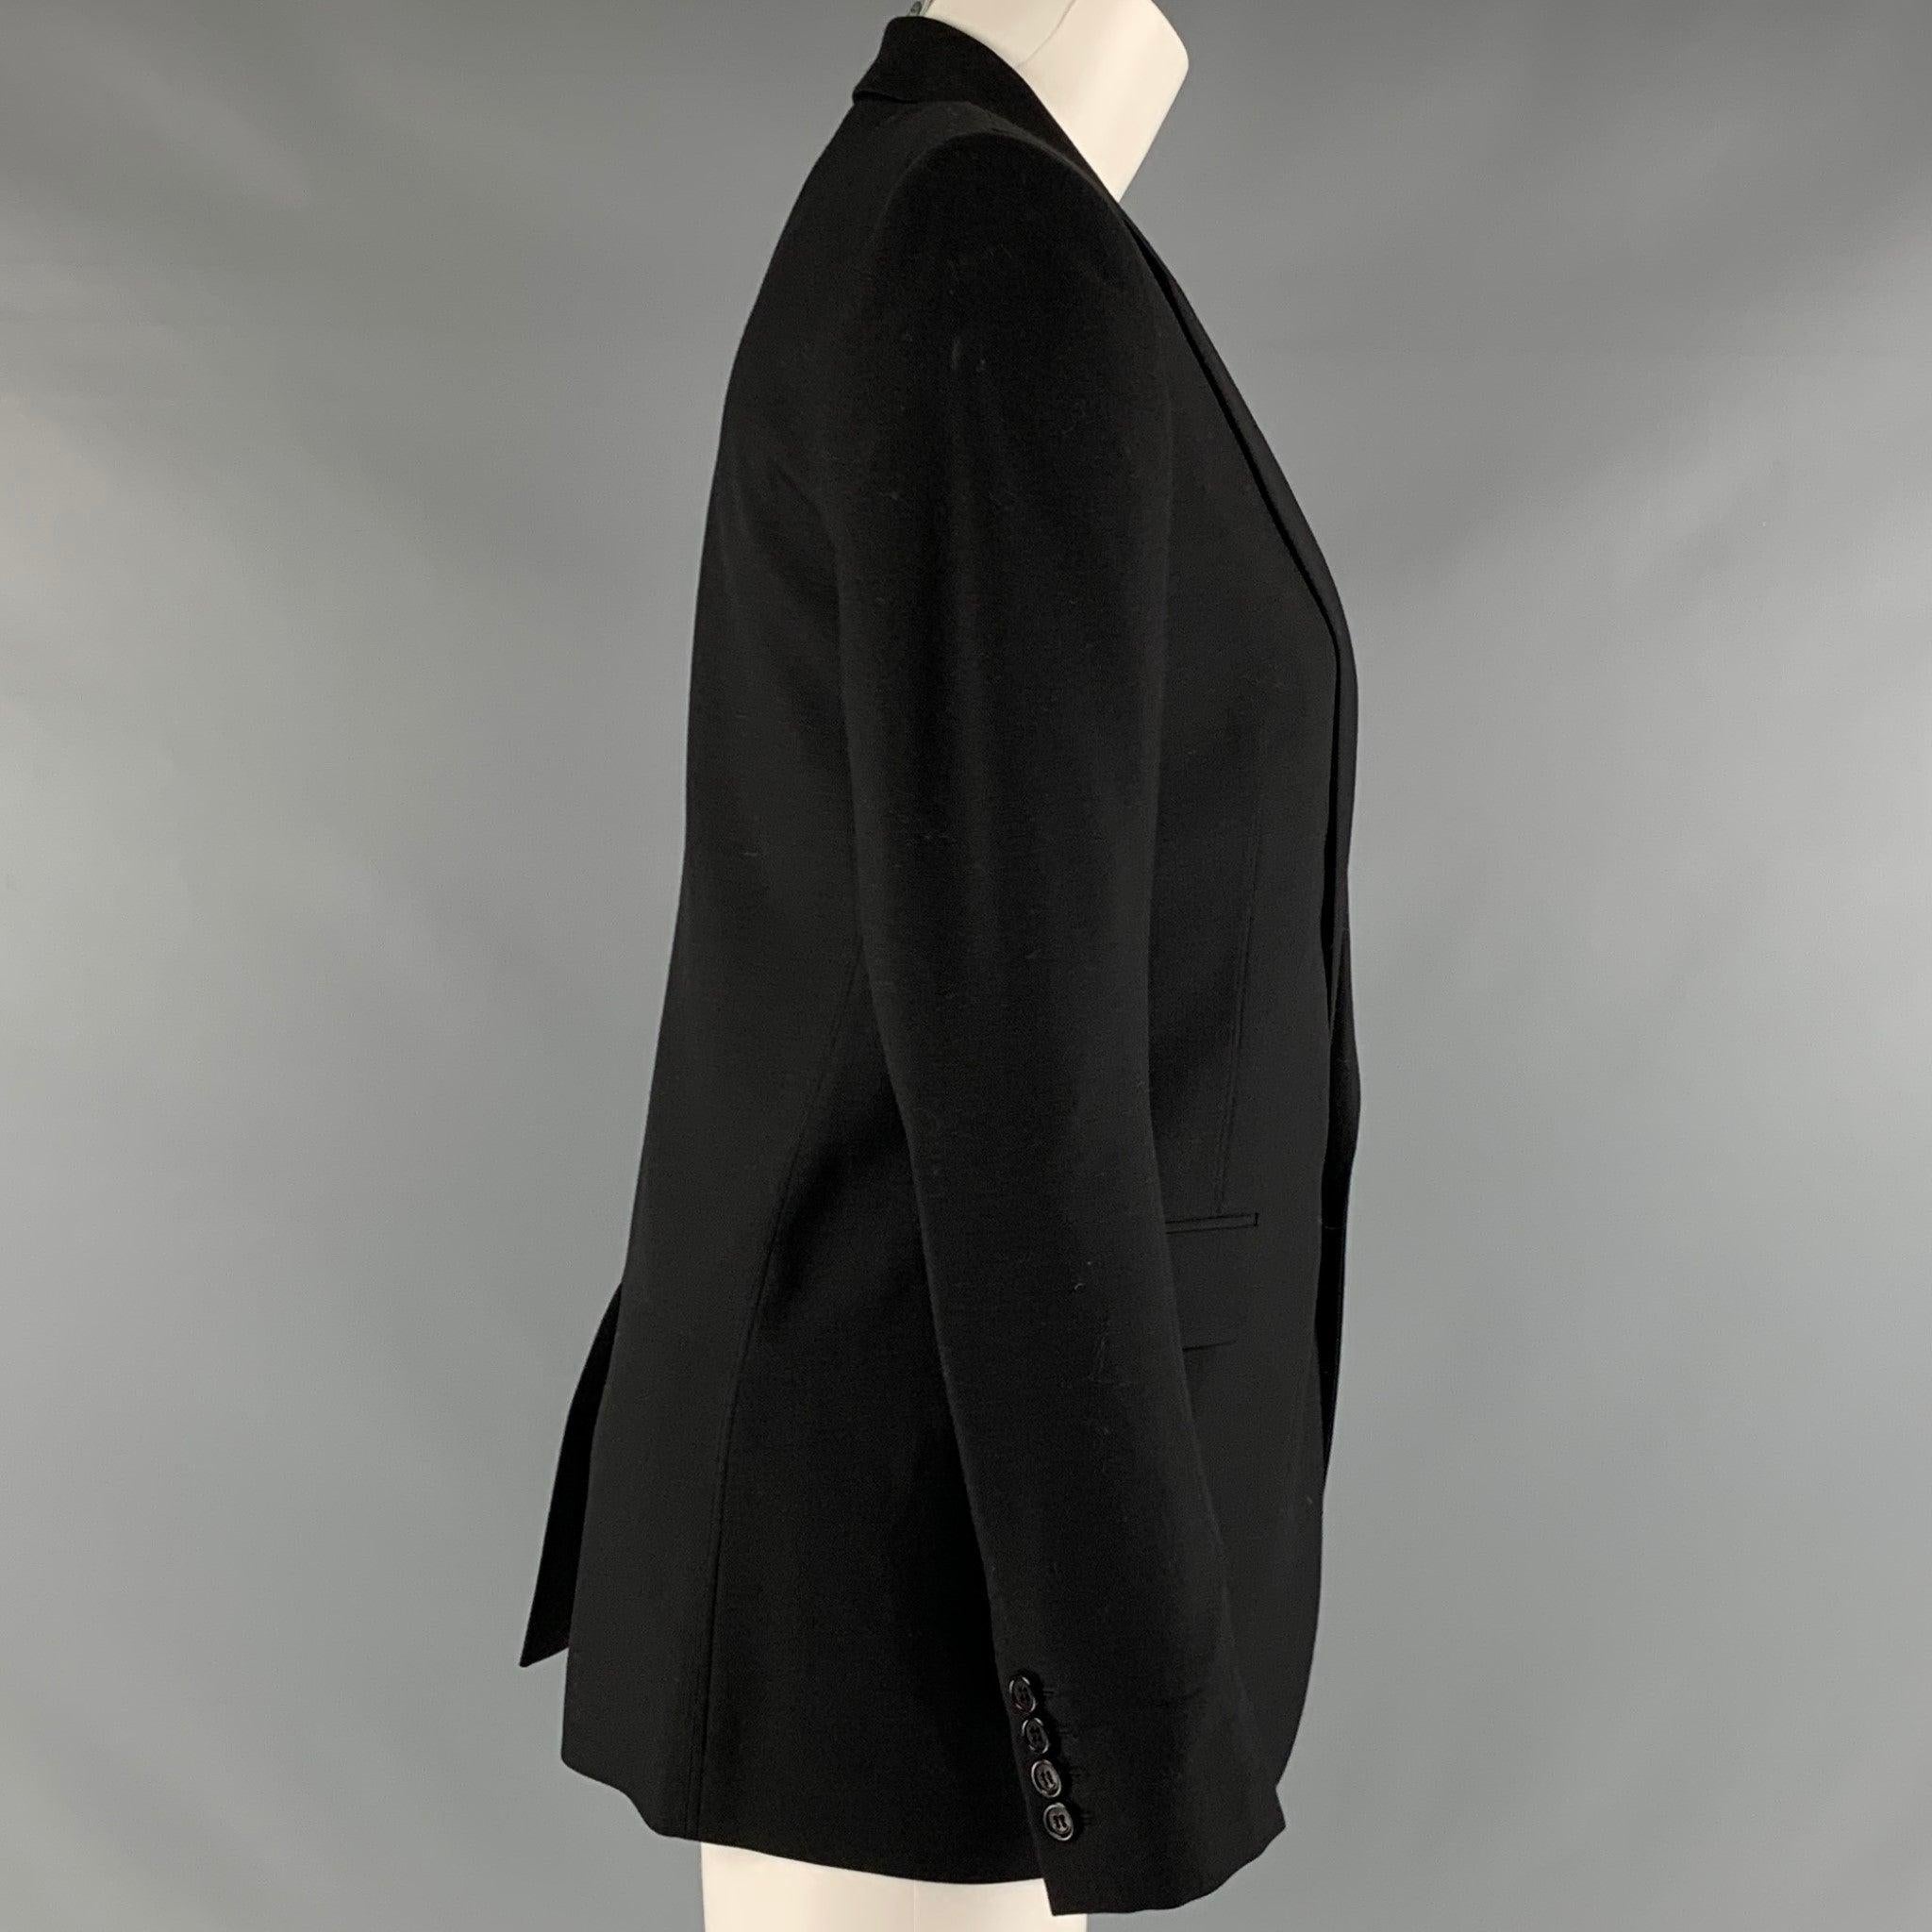 SAINT LAURENT blazer comes in a black virgin wool twill with a full liner featuring a peak collar, shoulder pads, and a single button closure. Made in Italy.Excellent Pre-Owned Condition. 

Marked:   4 

Measurements: 
 
Shoulder: 15 inches Bust: 36